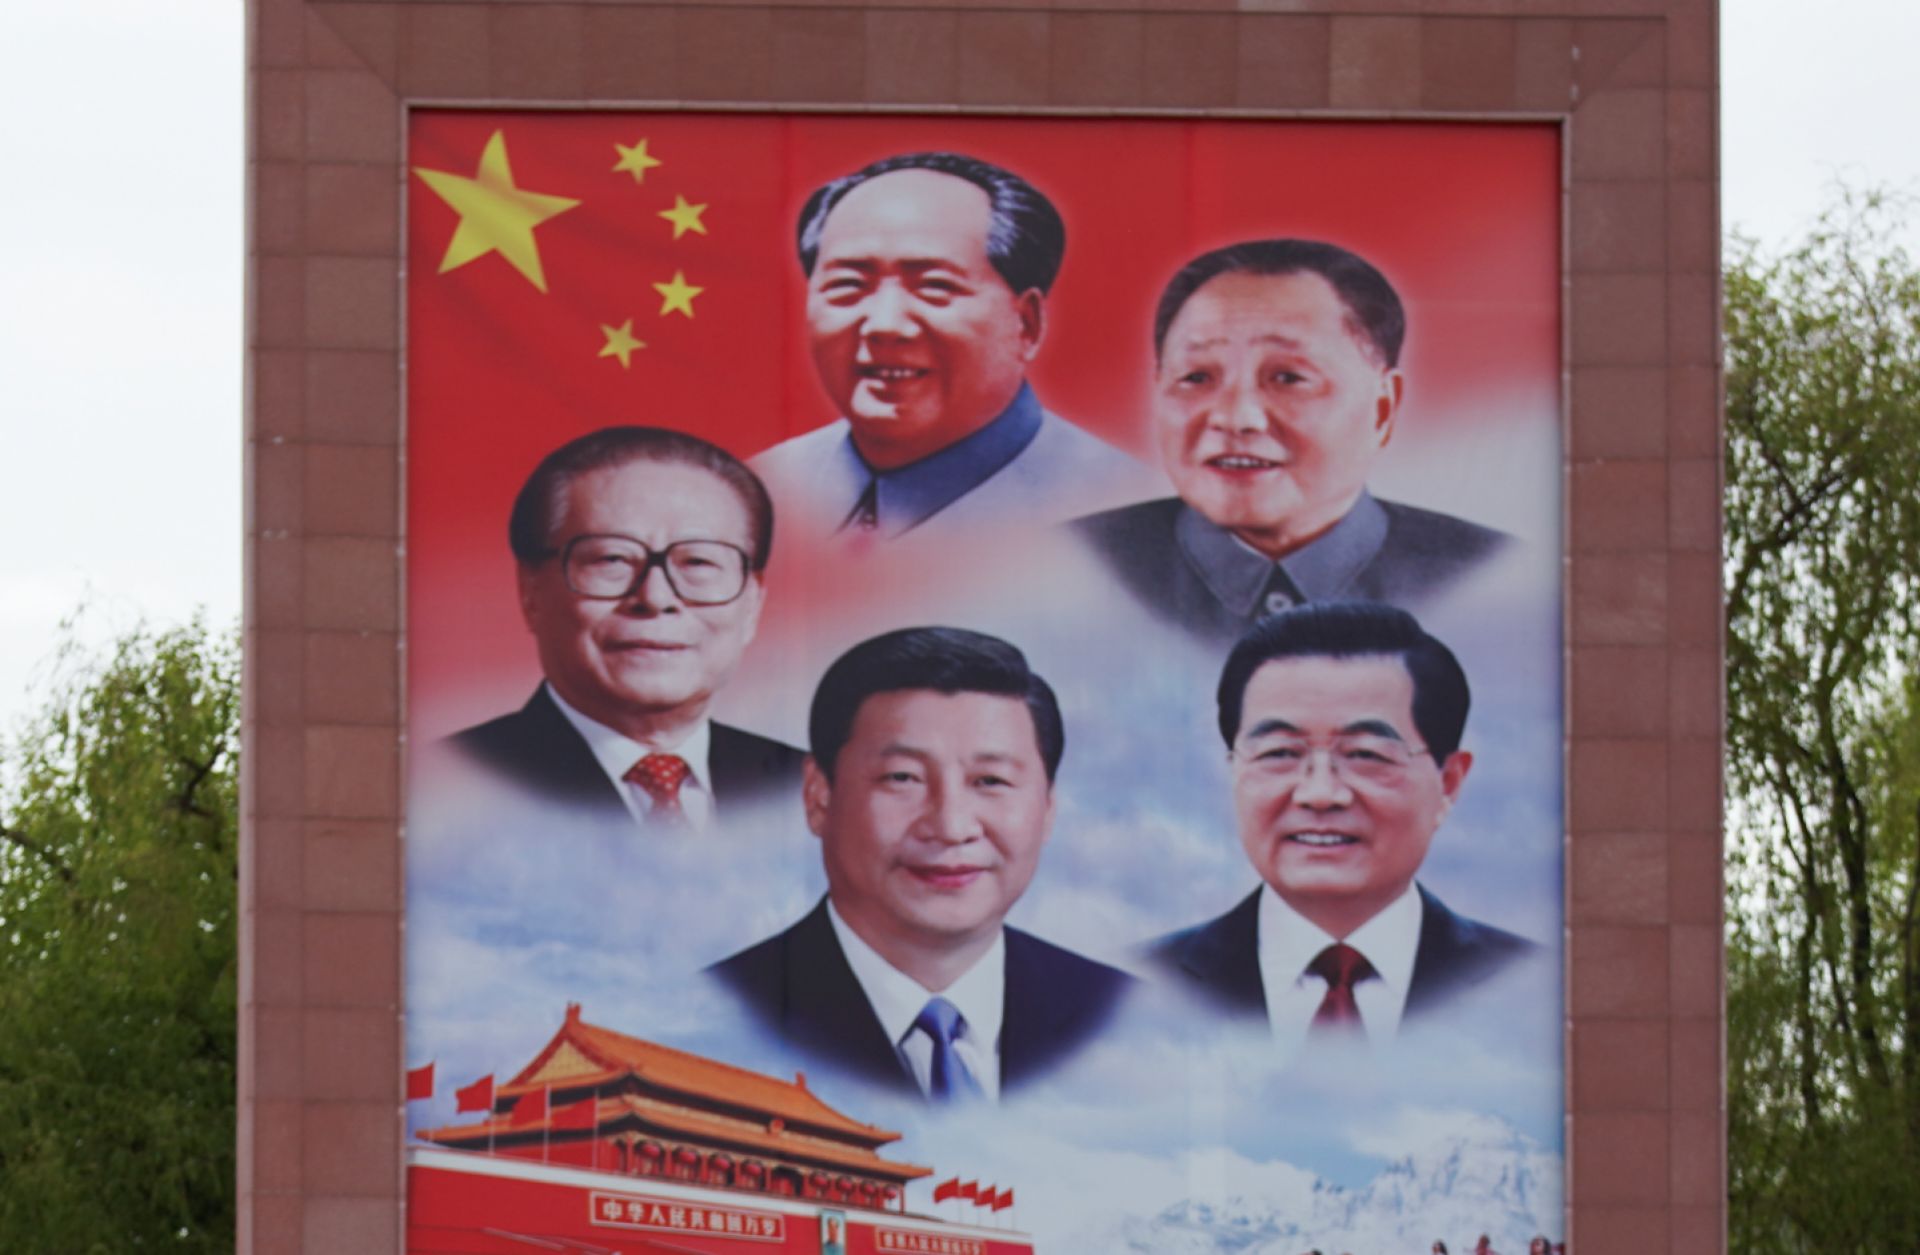 A large post with portraits of current Chinese Communist Party leader Xi Jinping (bottom center) and former leaders Mao Zedong, Deng Xiaoping, Jiang Zemin and Hu Jintao is seen in Lhasa, China on May 6, 2020. 